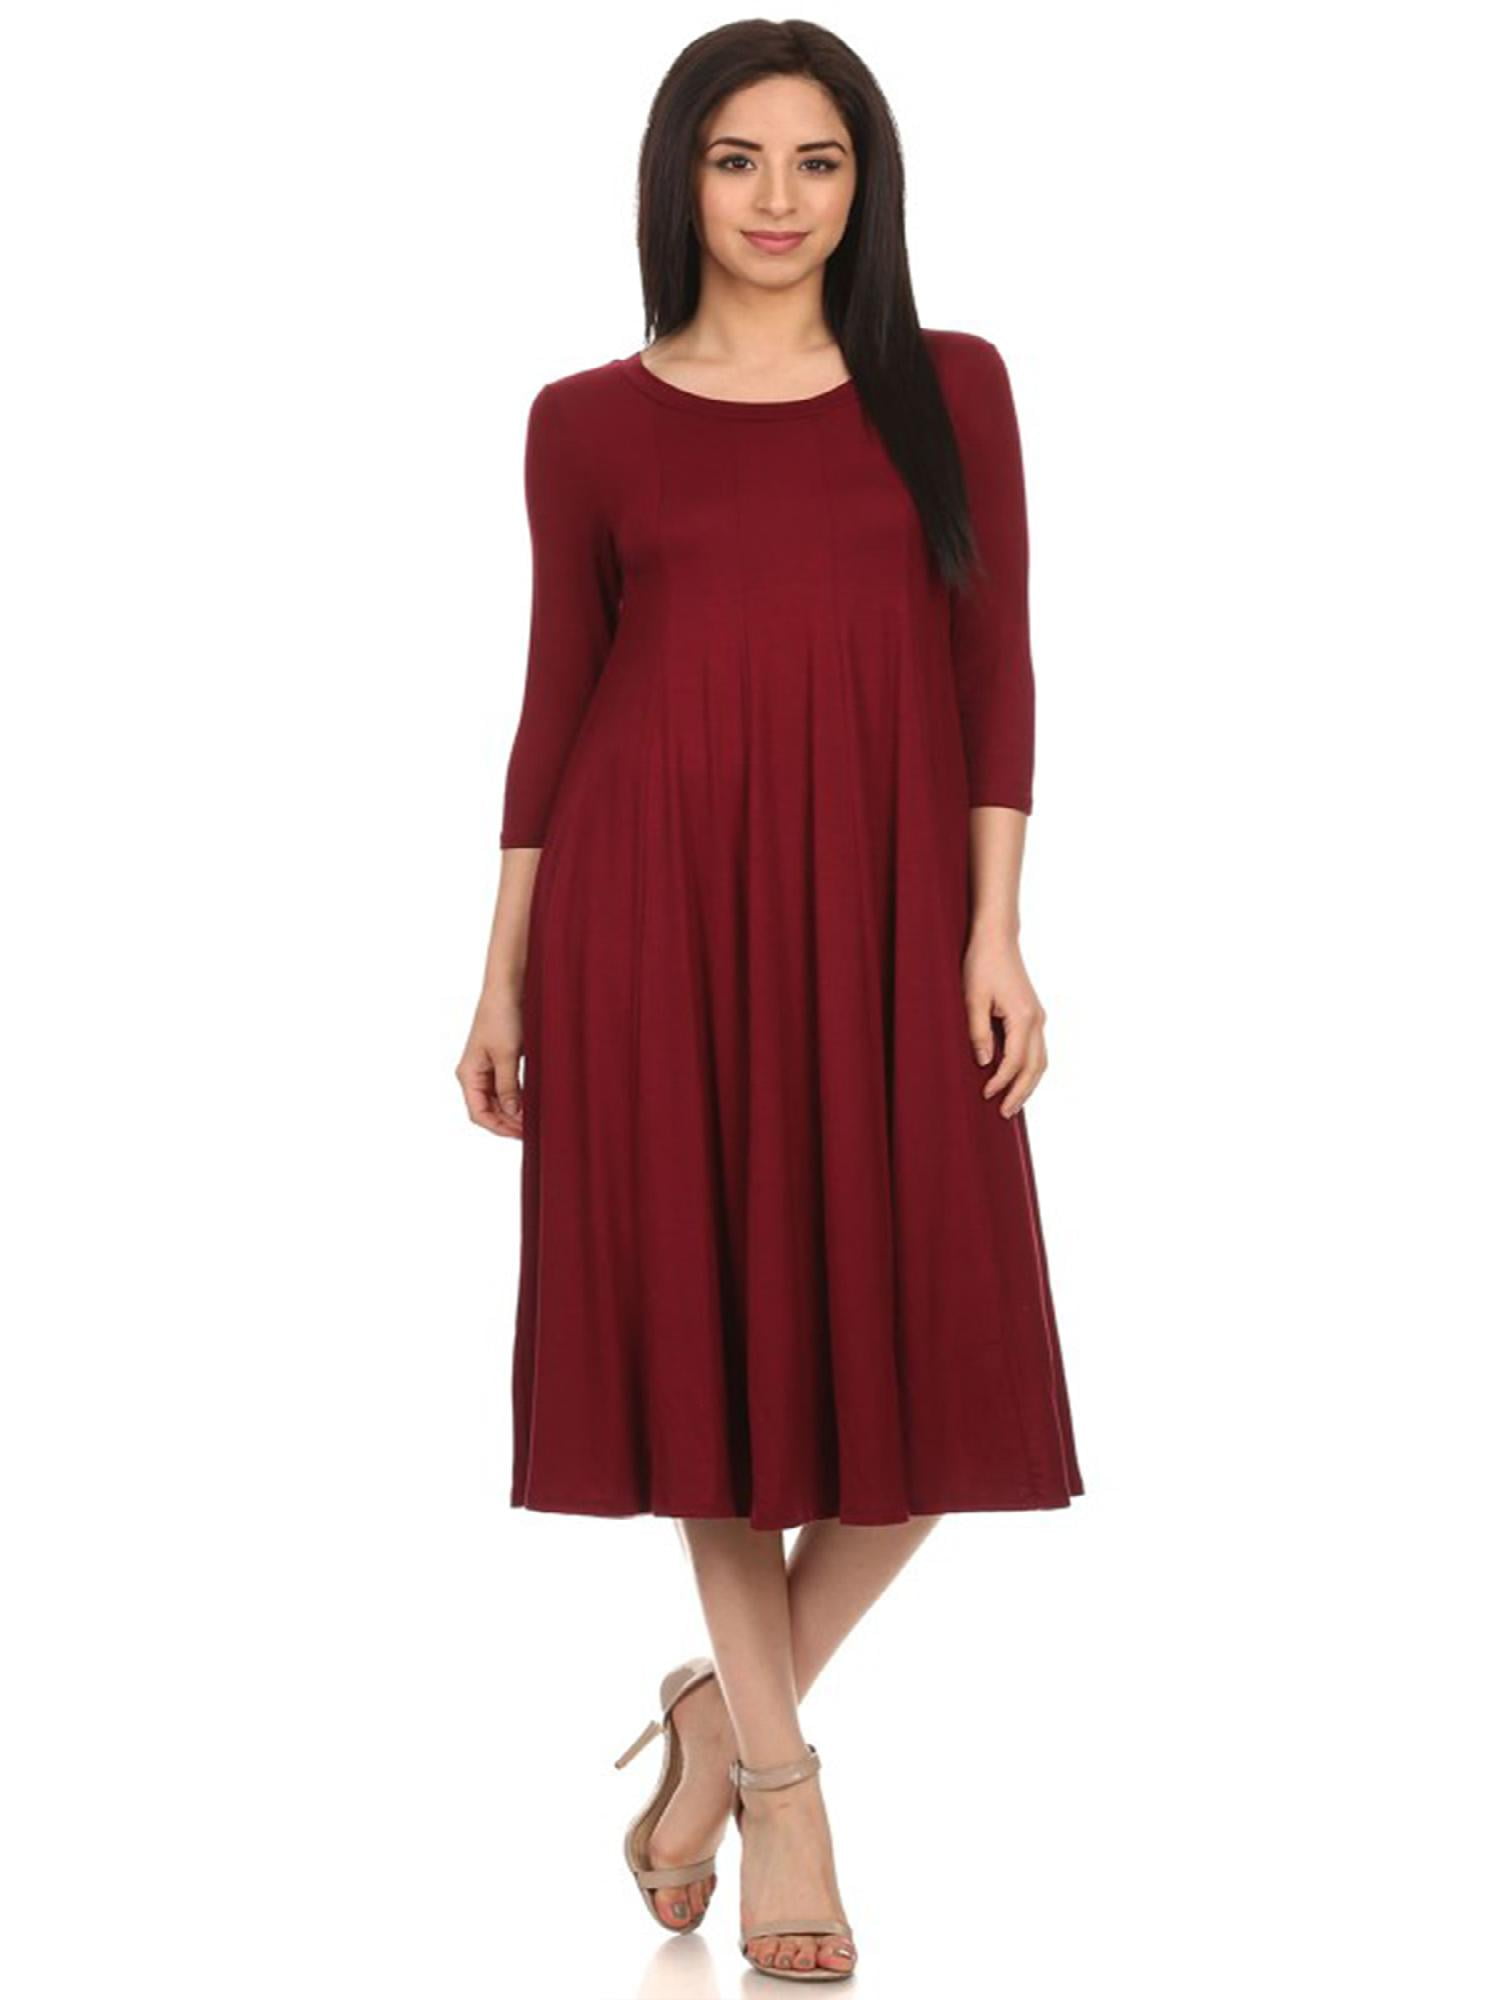 Women's Loose Fit 3/4 Sleeve Round Neck Jersey Knit A-Line Solid Midi Dress